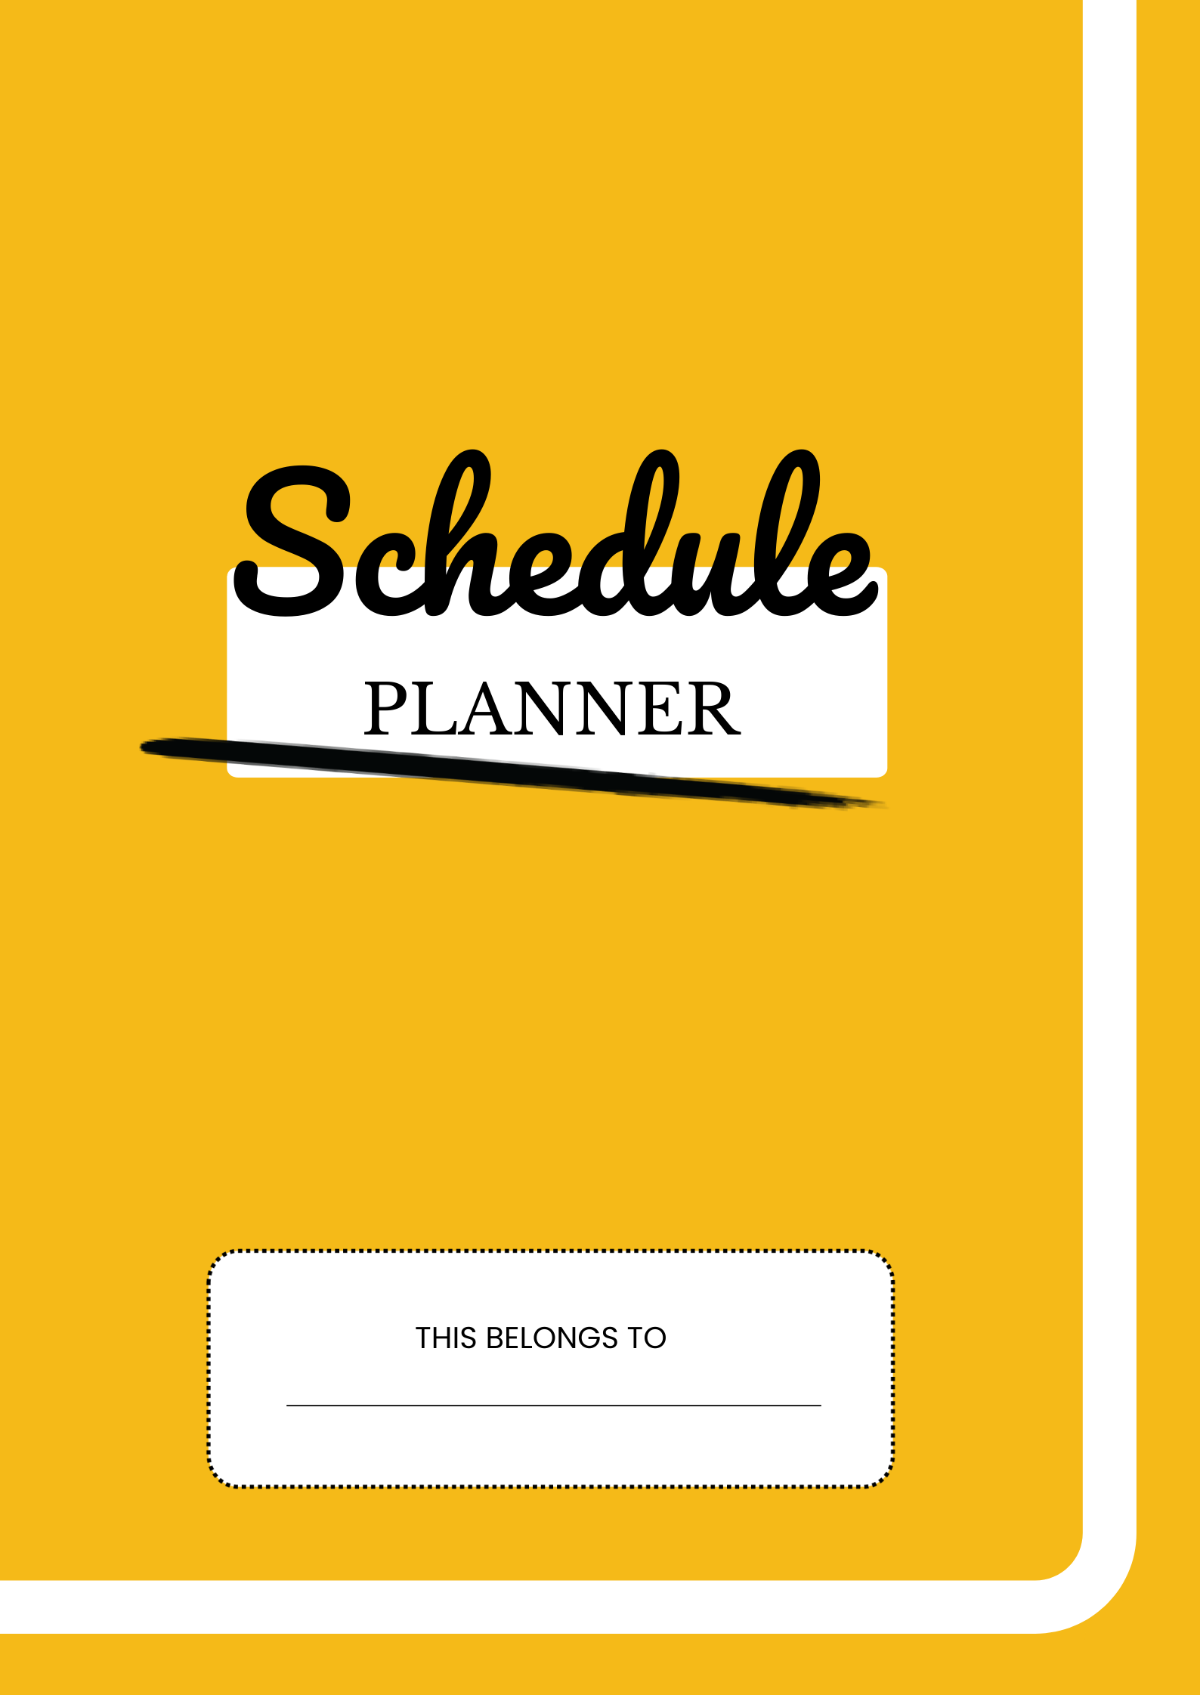 Free Editable Schedule Planner Template